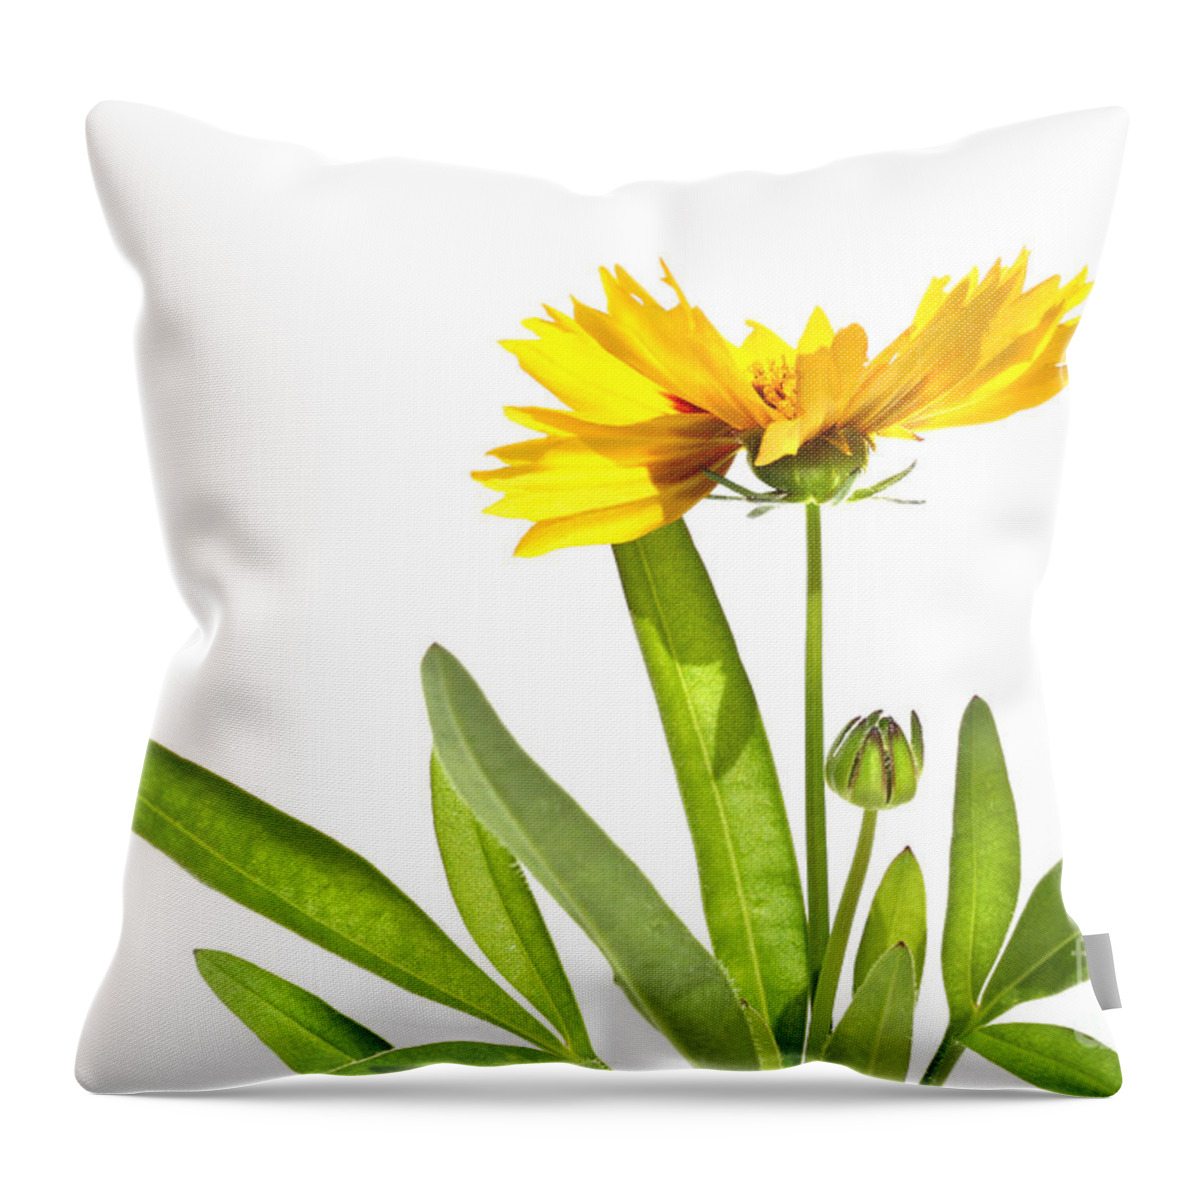 Abstract Throw Pillow featuring the digital art Yellow daisy isolated against white by Sandra Cunningham